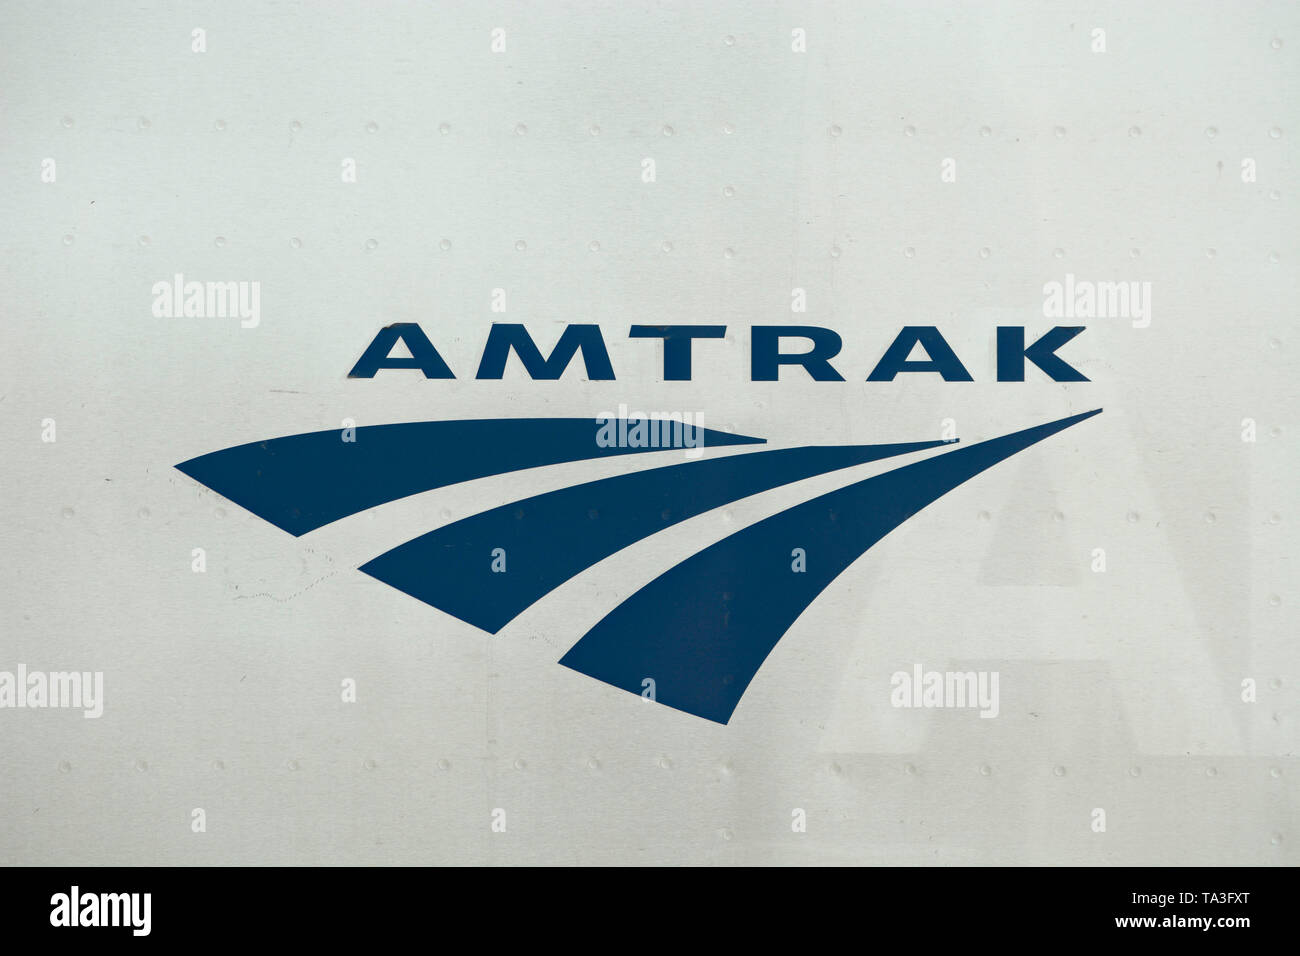 The Amtrak logo on the side of a passenger coach stopped to pick up passengers at the historic train depot and Amtrak stop in Lamy, New Mexico, USA. Stock Photo